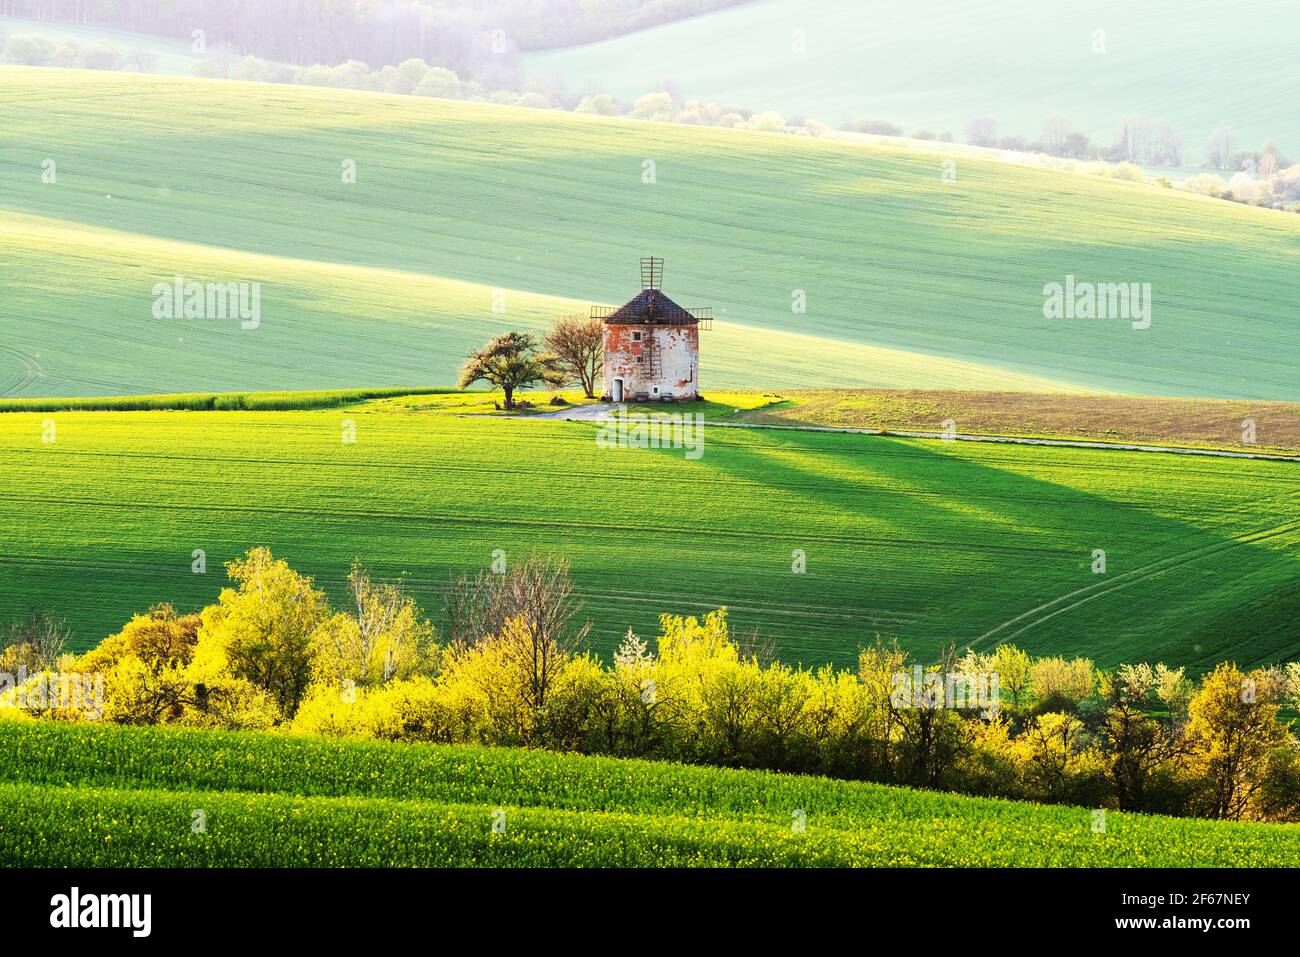 Picturesque rural landscape with old windmill Stock Photo